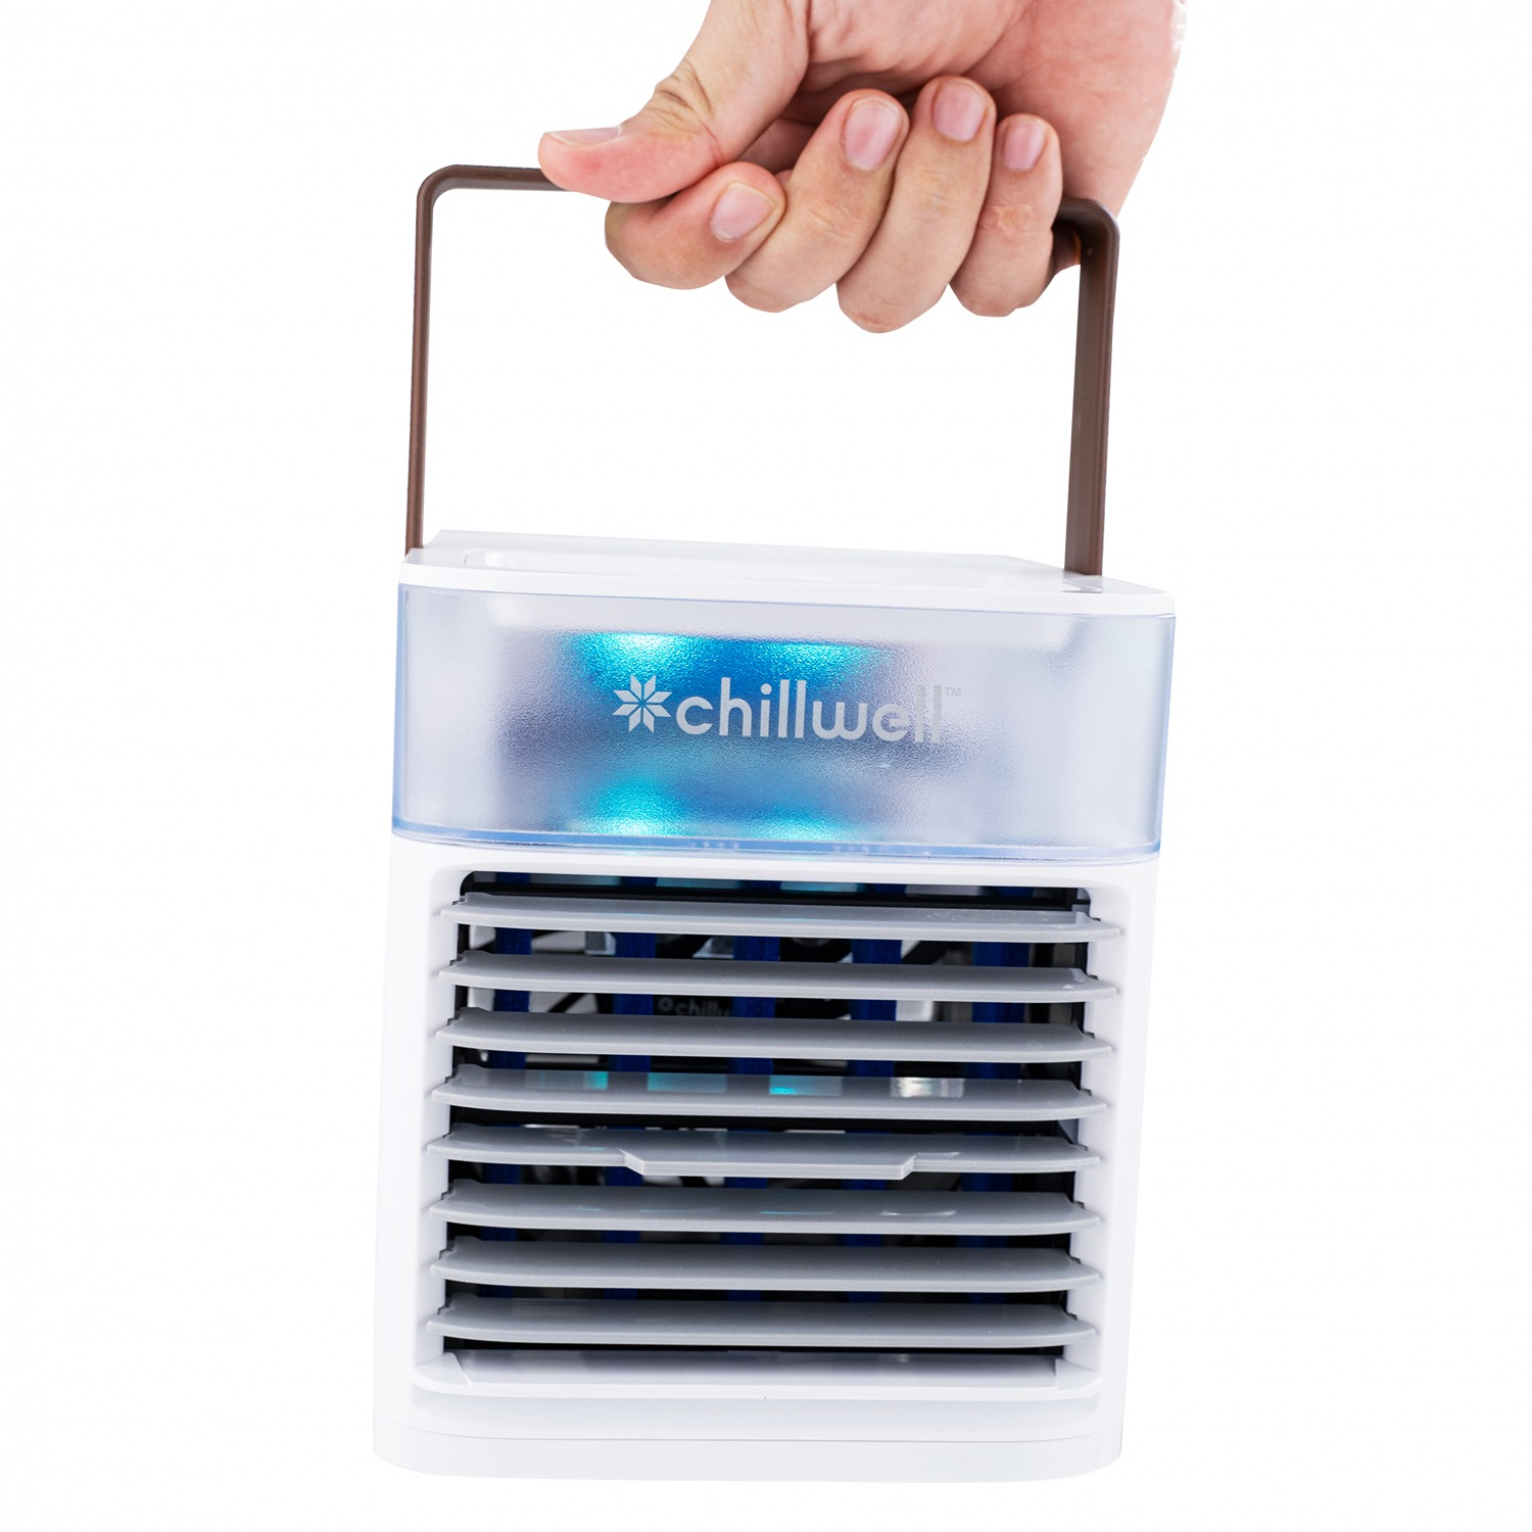 Portable Chillwell Ac Cooler Reviews